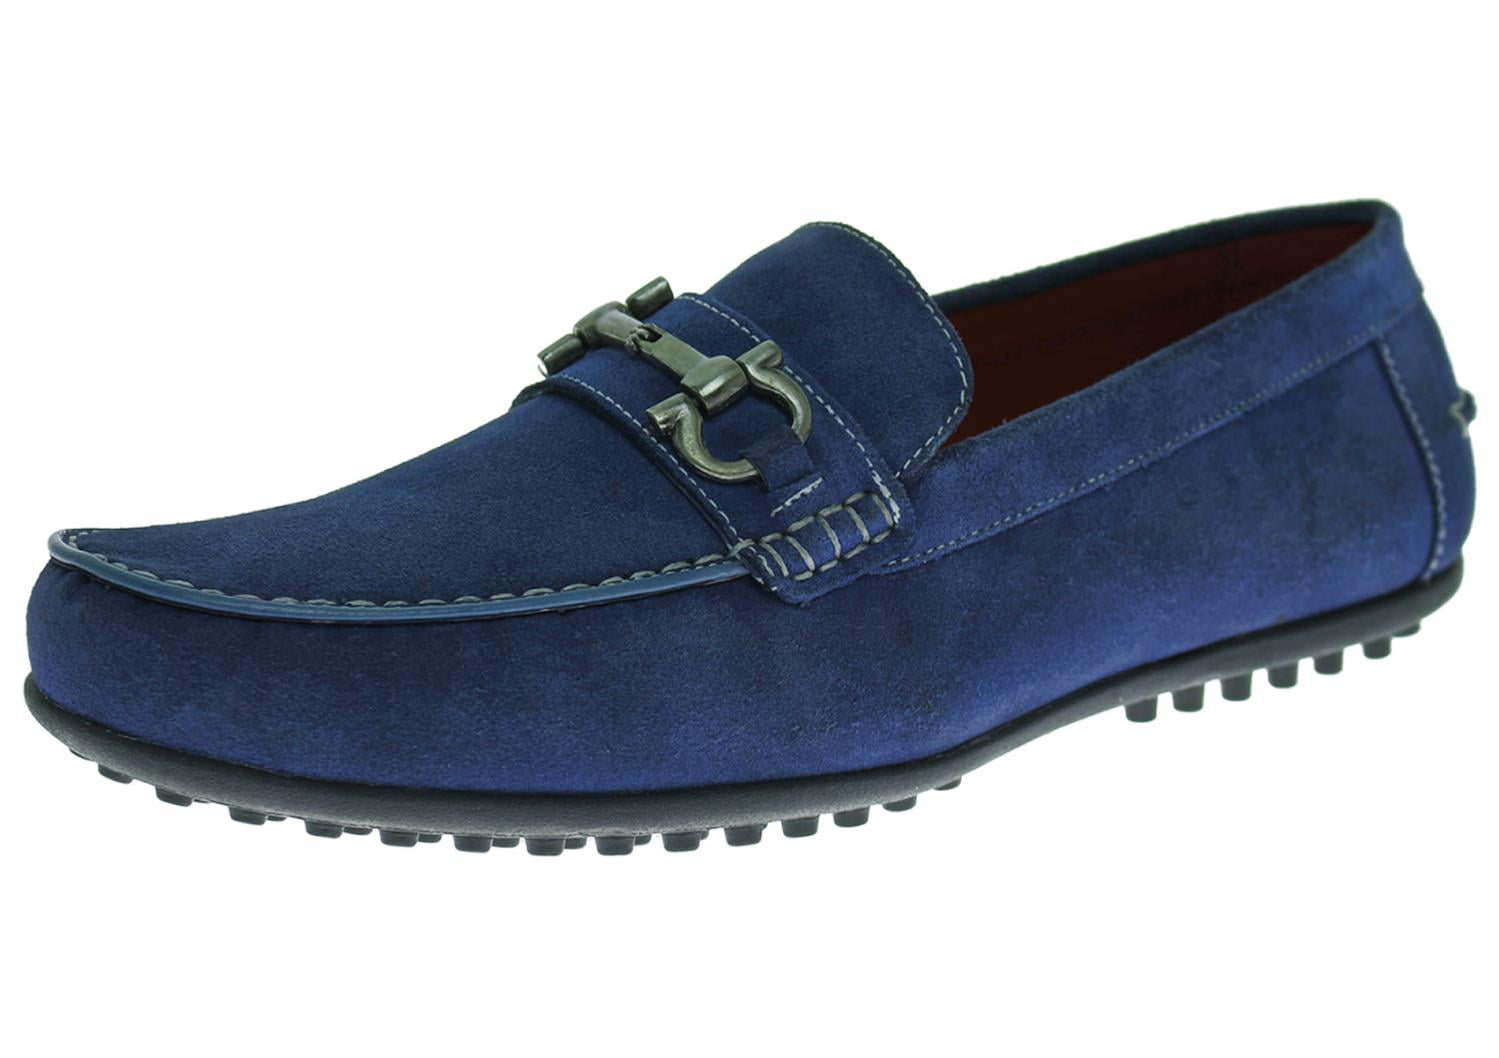 Mens Smart Casual Loafers Designer Slip on Party Driving PU Suede Boat Shoes 